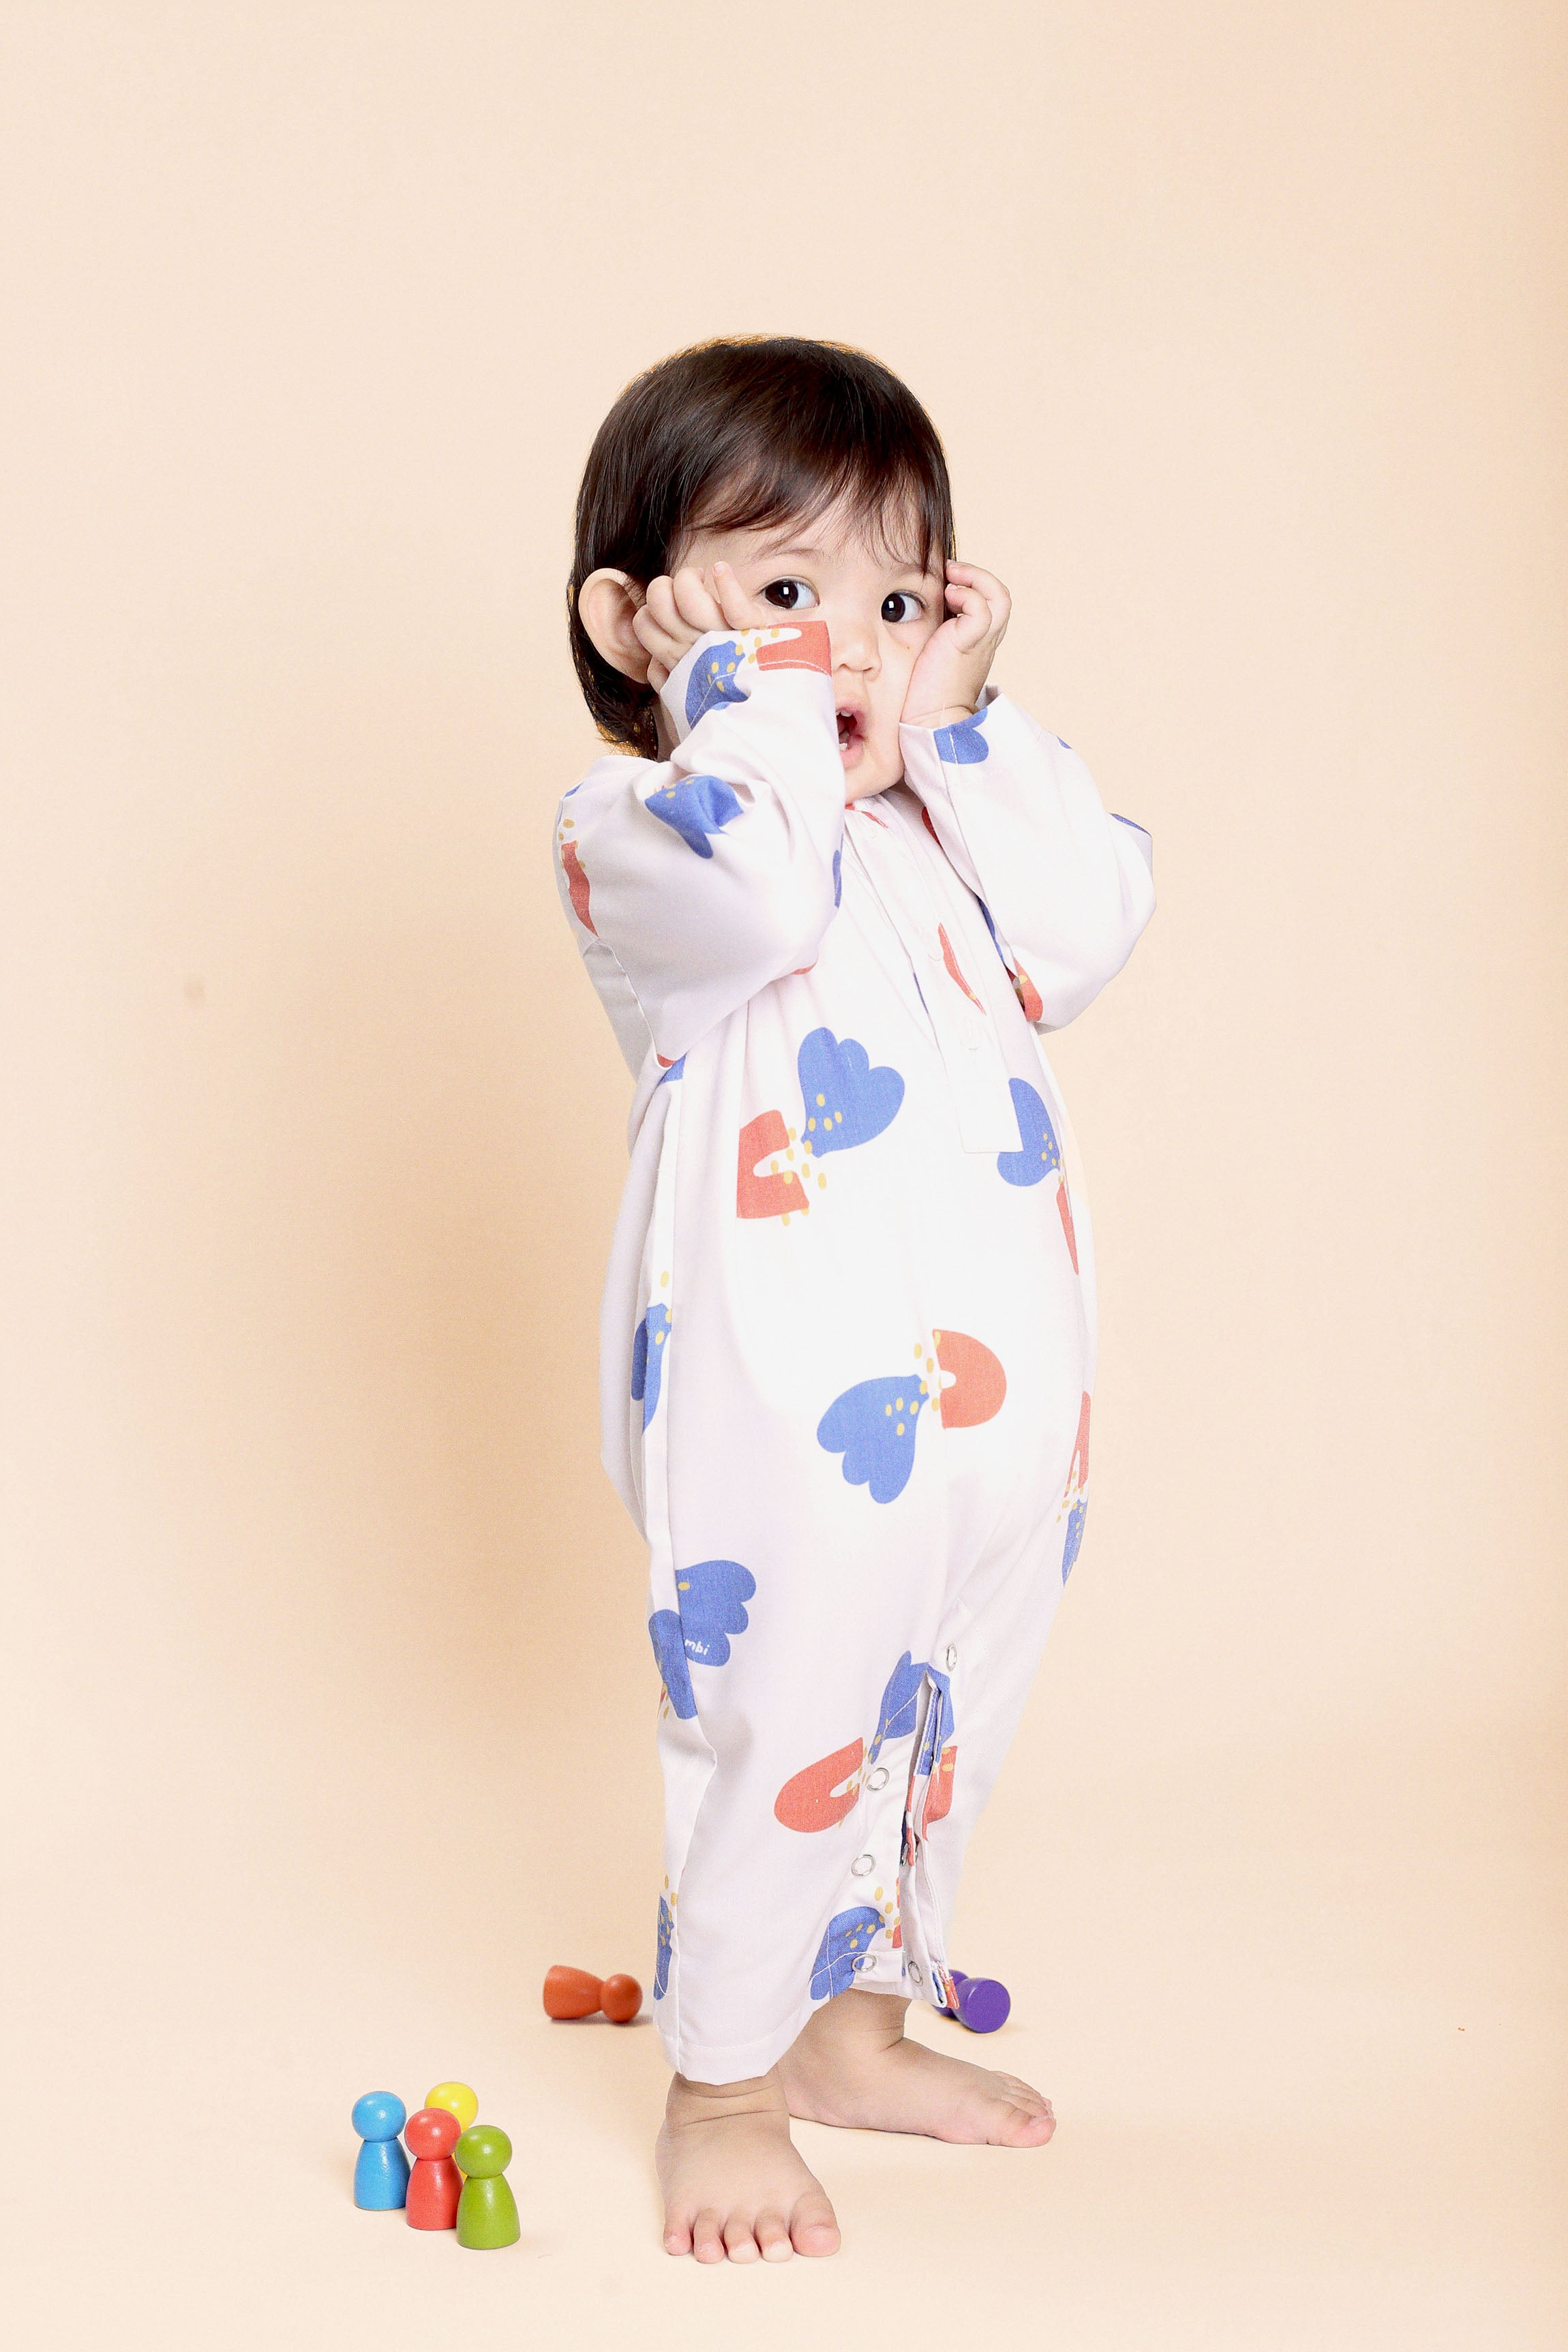 The Baby Jumpsuit Series Jolly Print